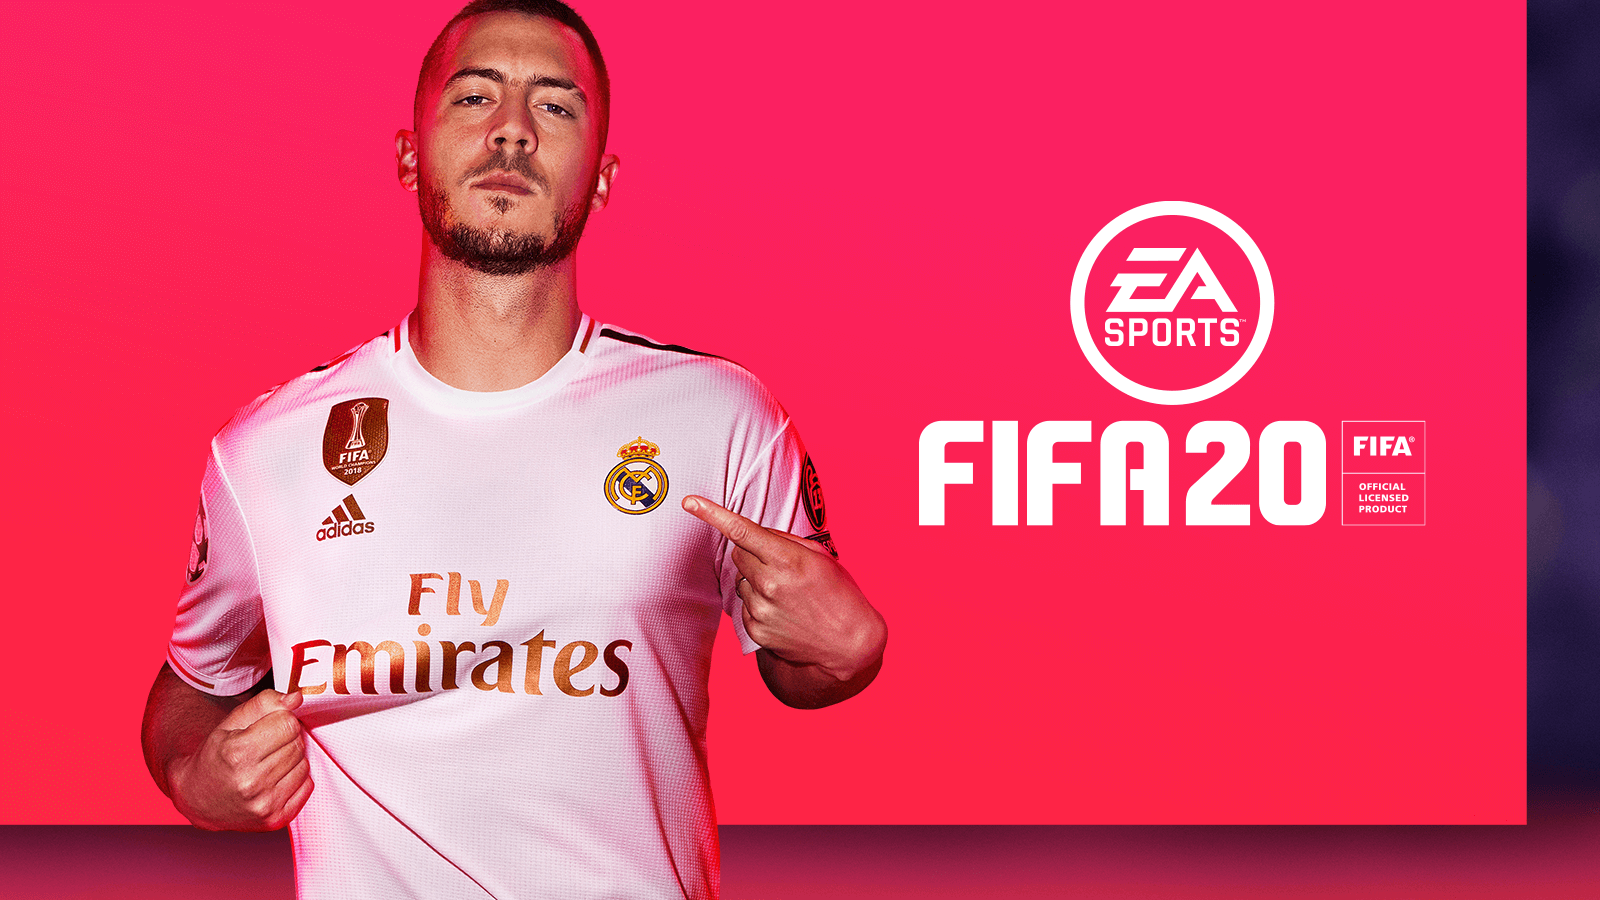 FIFA 20 Cover Athlete Standard Edition